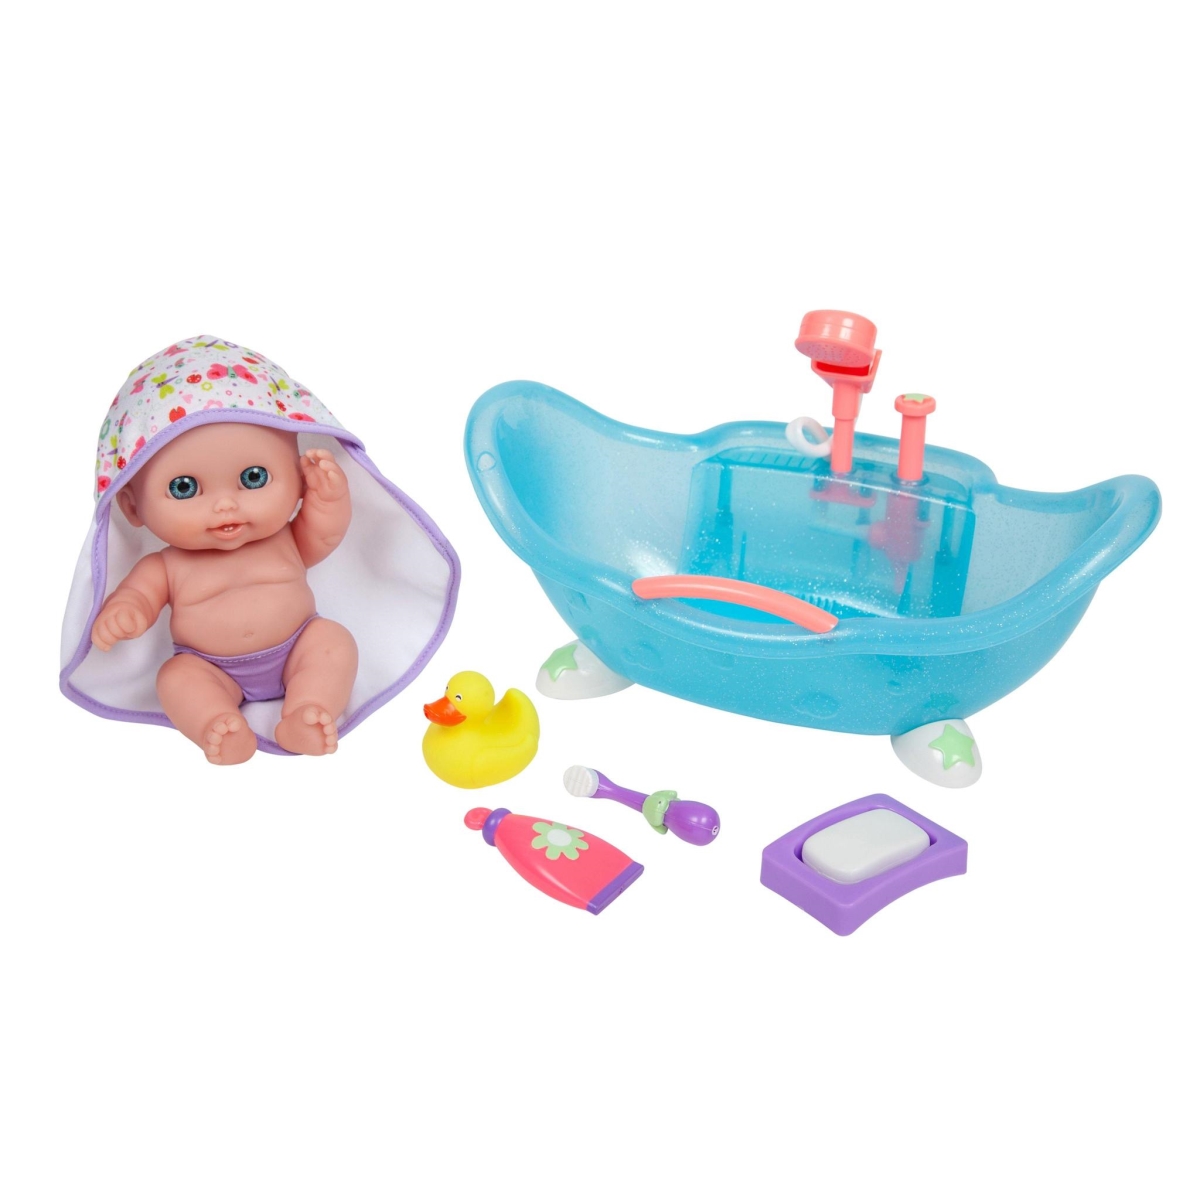 Picture of JC Toys Lil Cutesies 8.5 in. Baby Doll in Bathtub with Fun Accessories - All-Vinyl